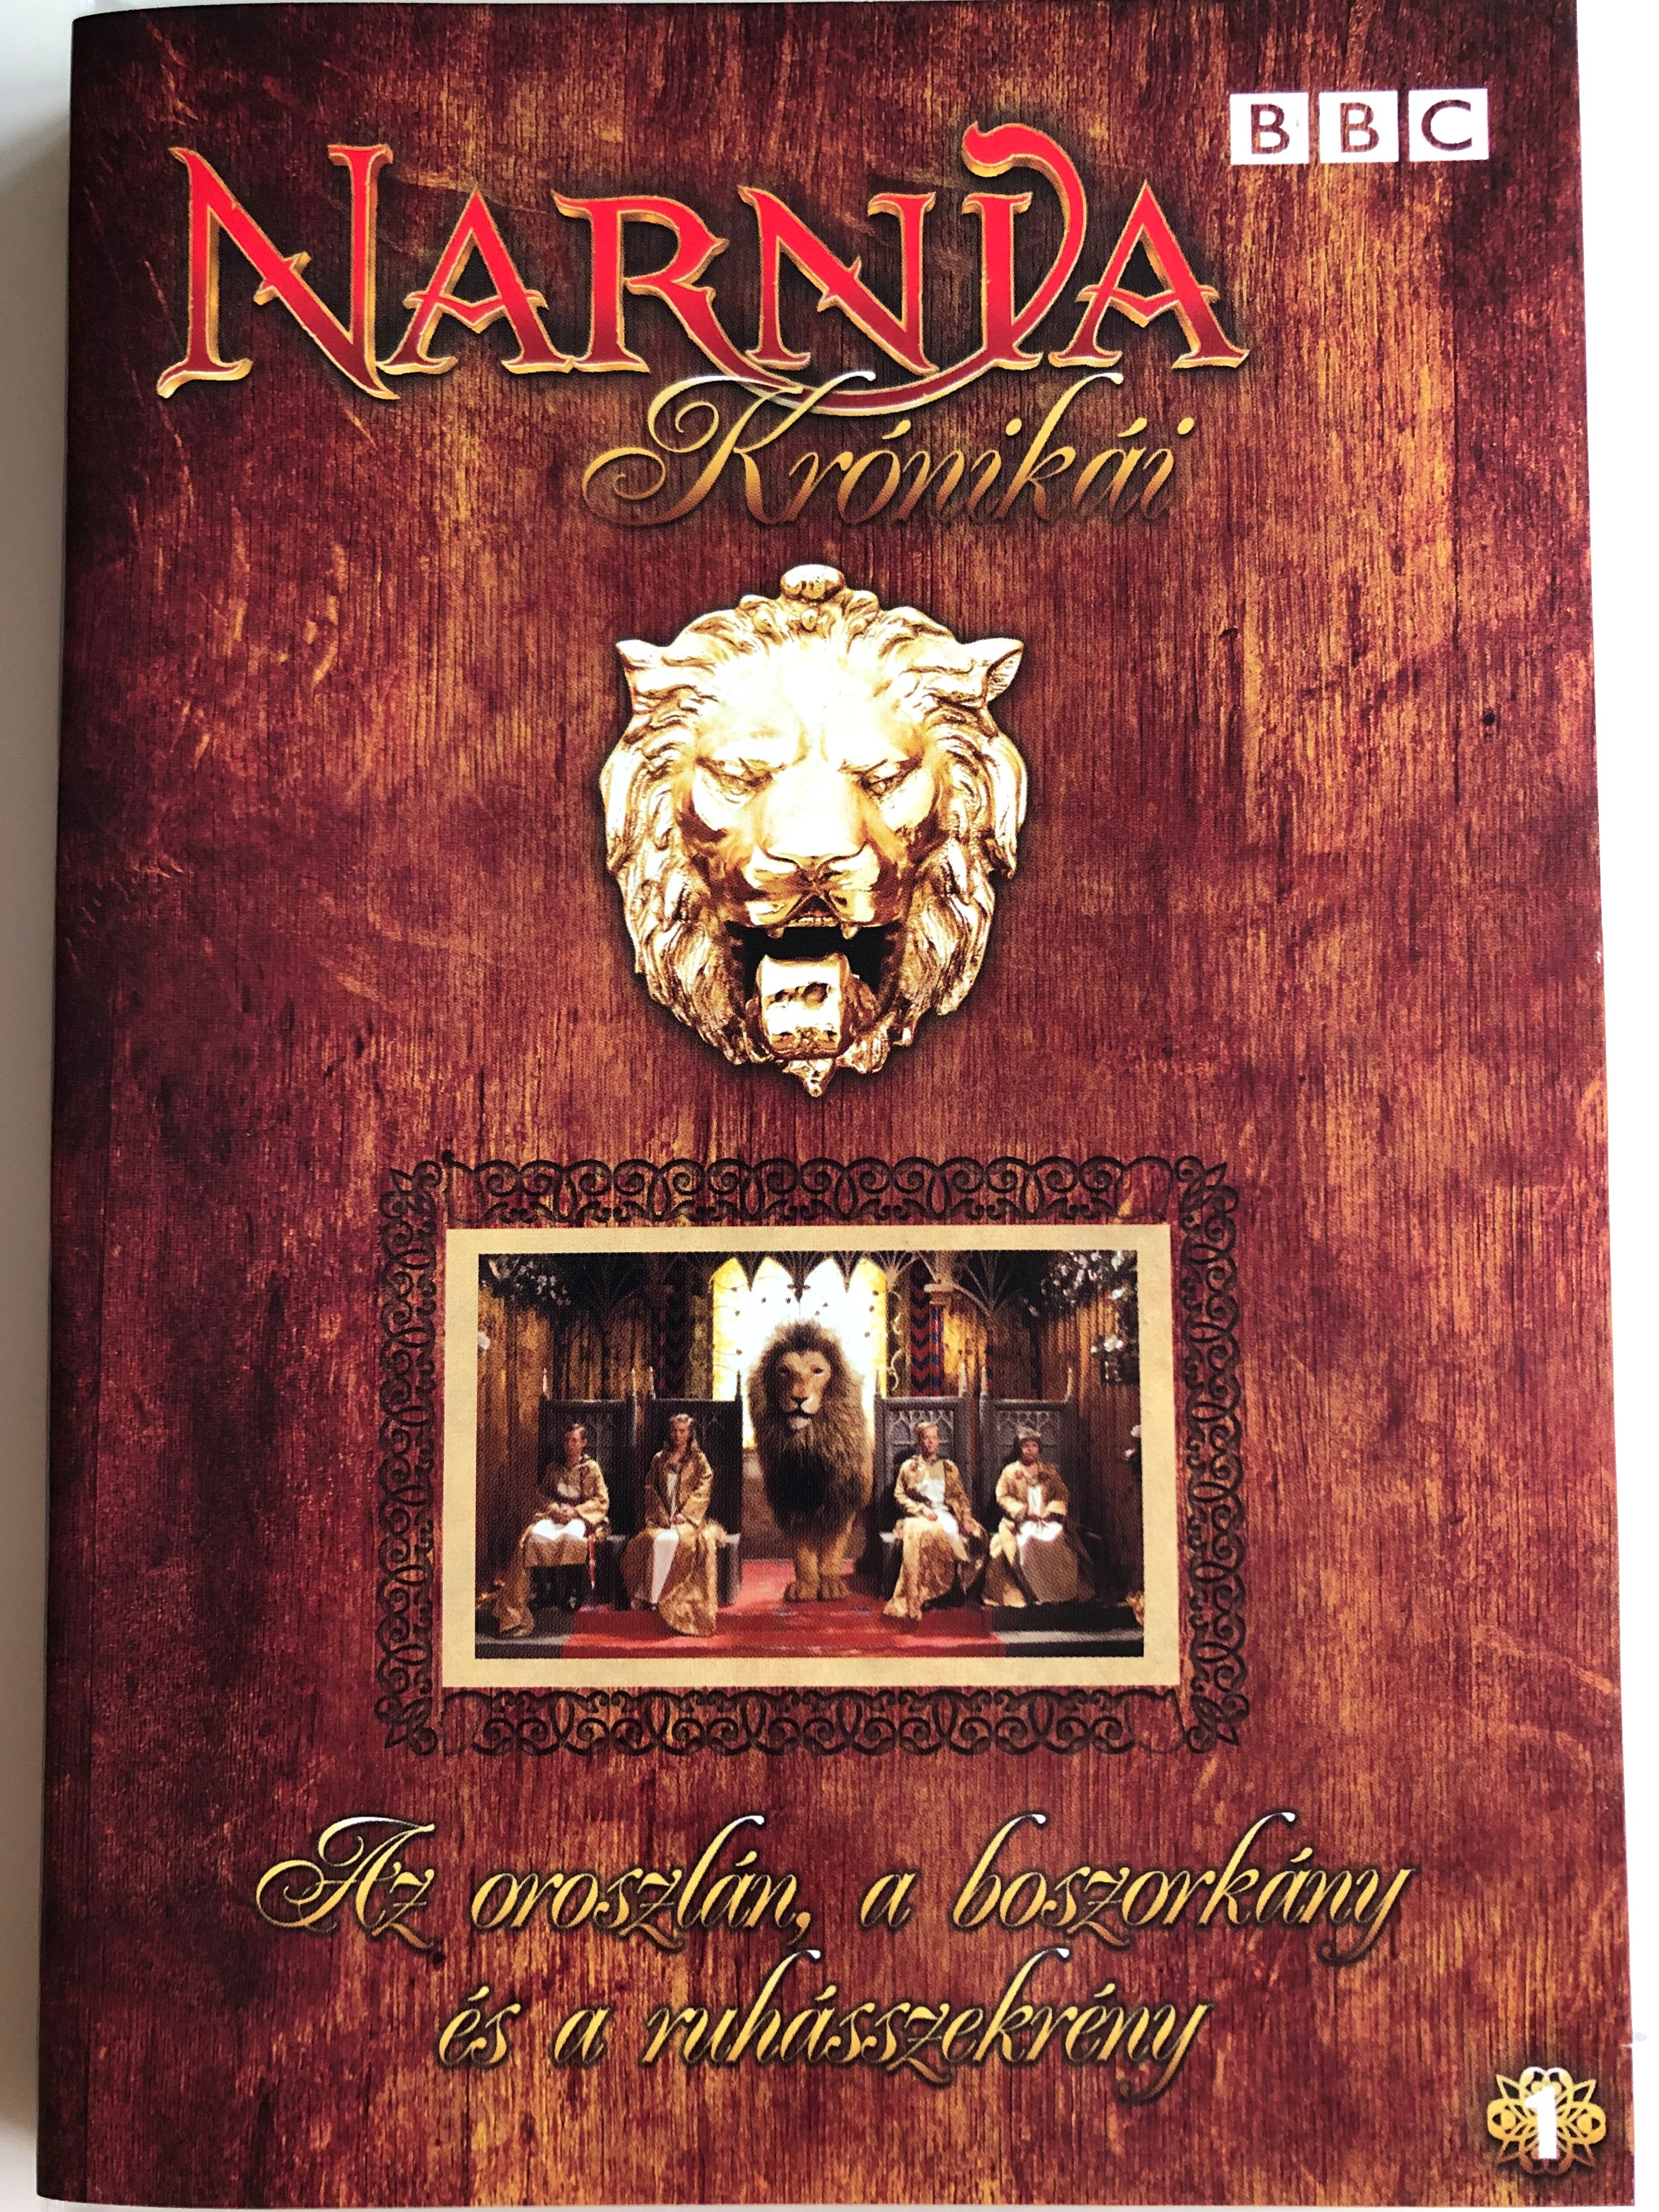 the-chronicles-of-narnia-the-lion-the-witch-and-the-wardrobe-dvd-1988-narnia-kr-nik-i-az-oroszl-n-a-boszork-ny-s-a-ruh-sszekr-ny-bbc-directed-by-marilyn-fox-1-.jpg